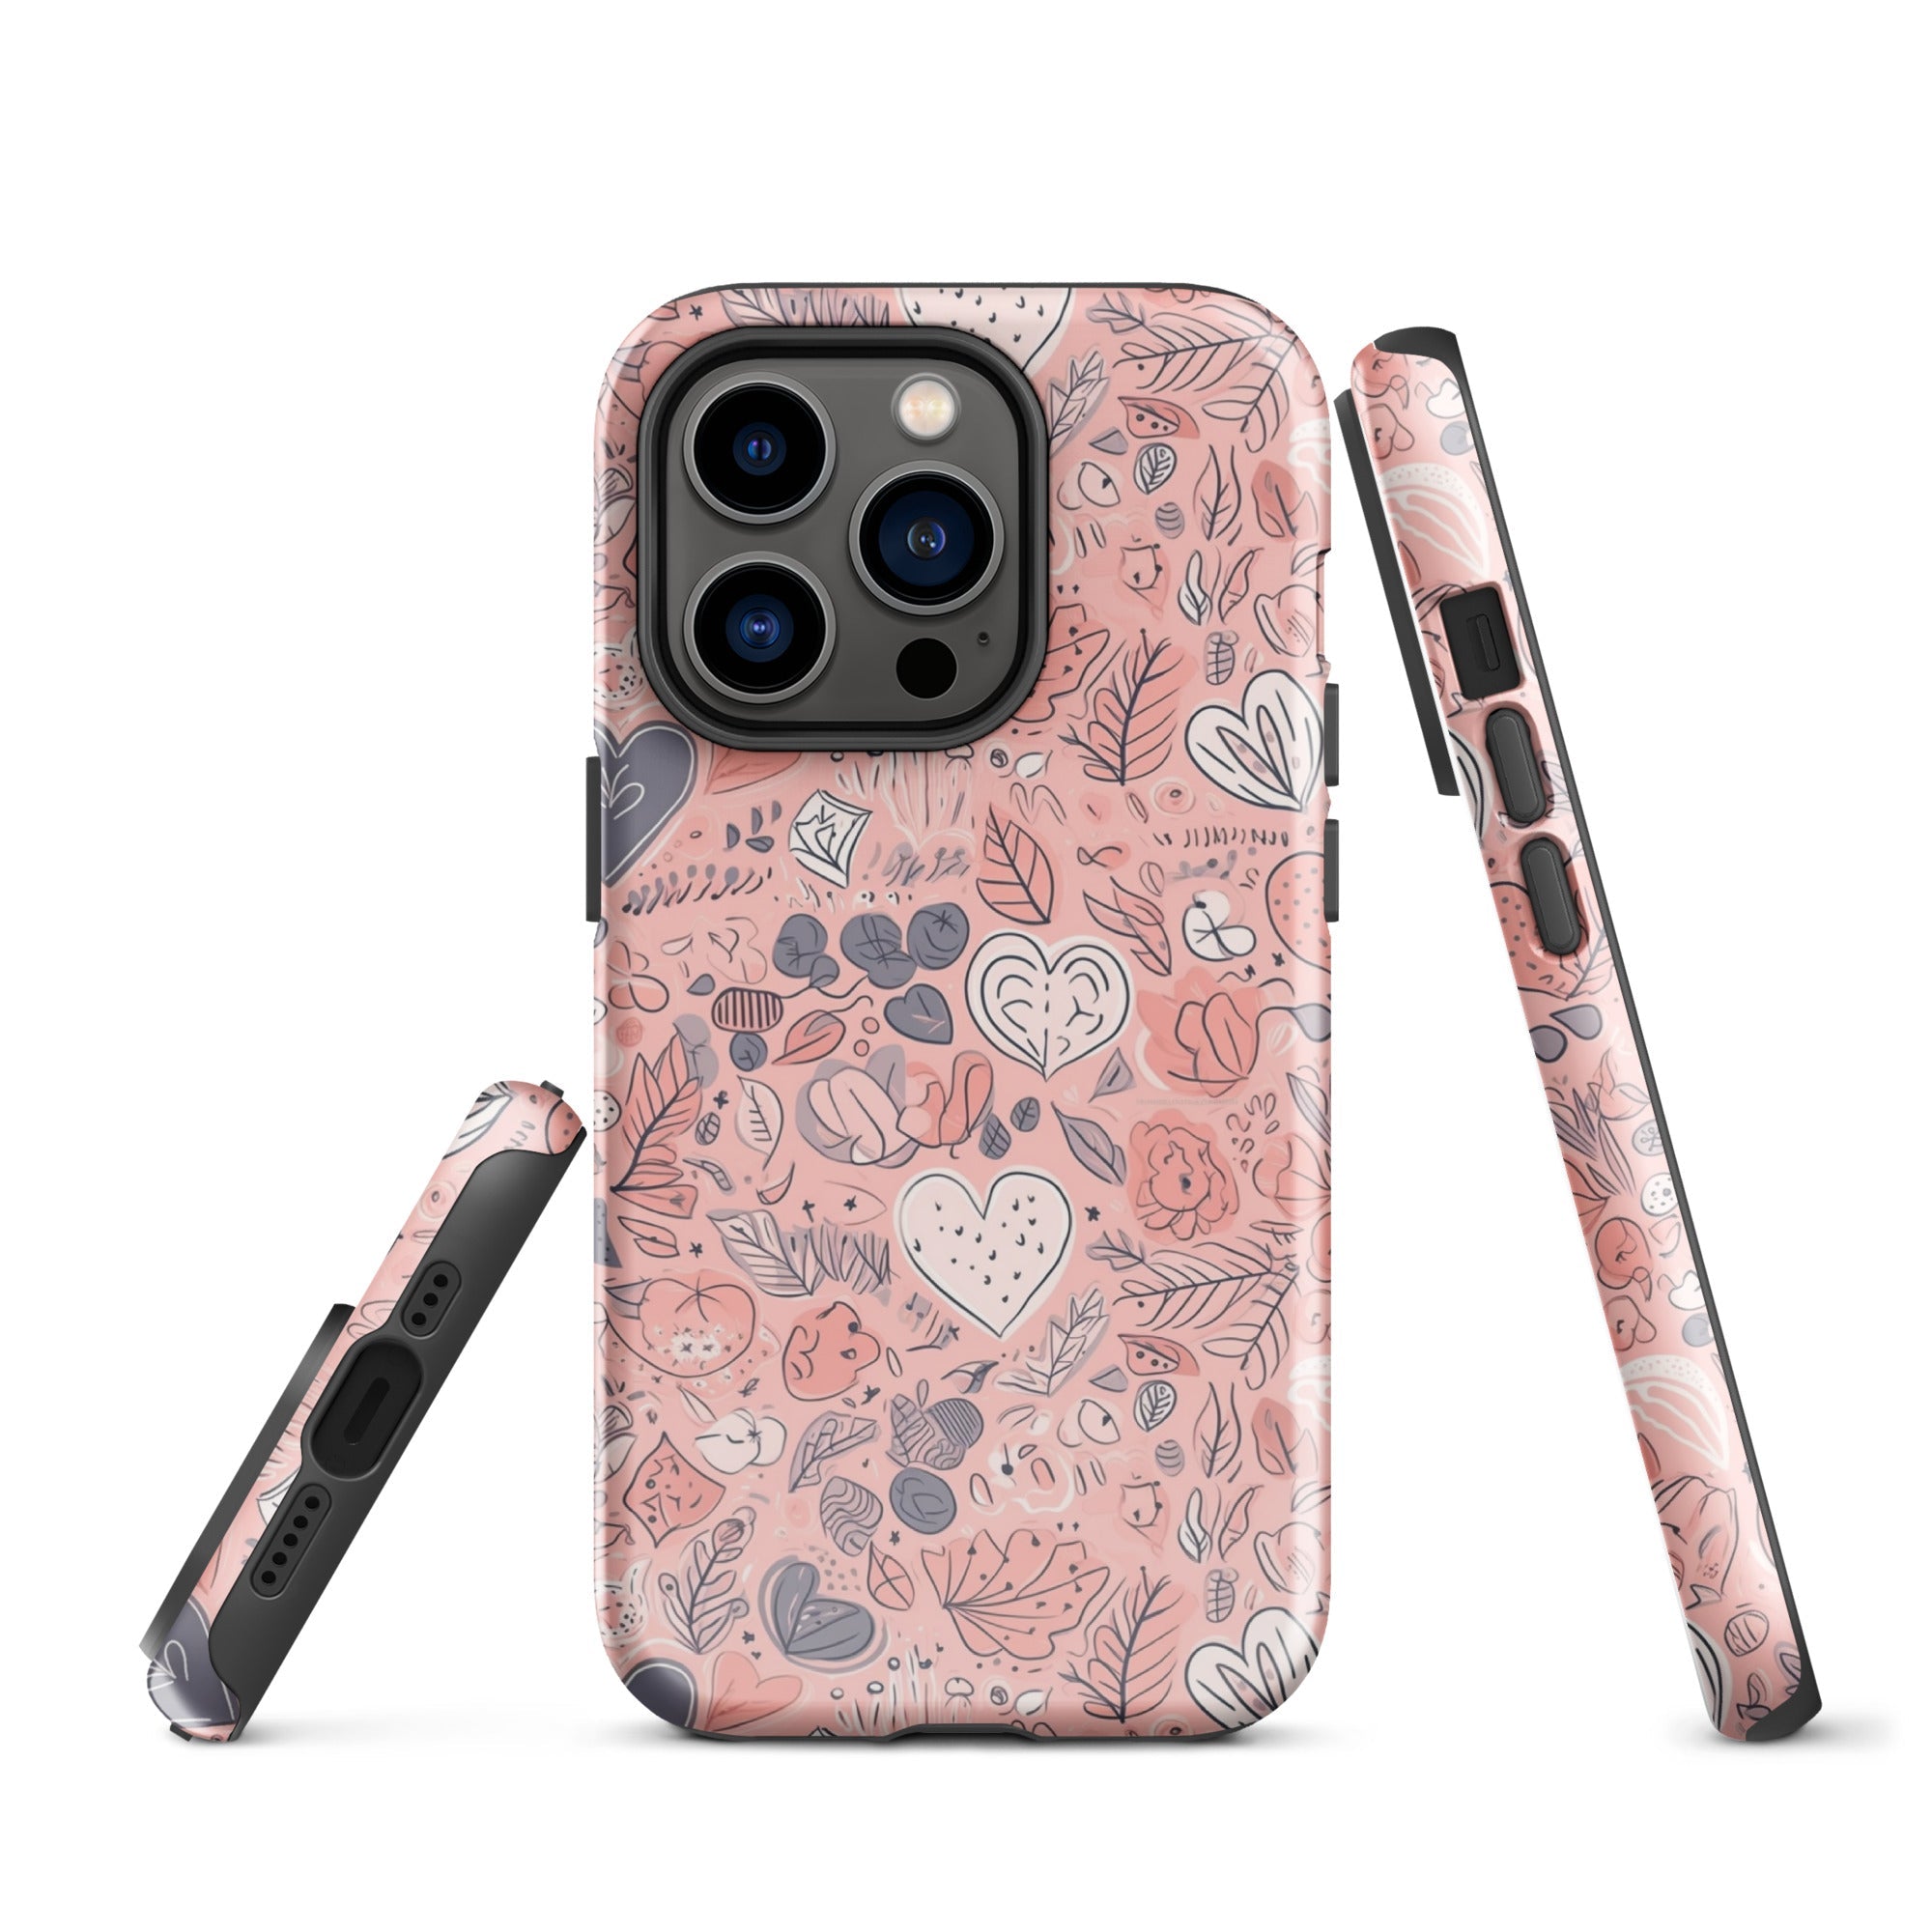 Springtime Blushing Hearts and Leaves - Whimsical Romance - iPhone Case - Pattern Symphony